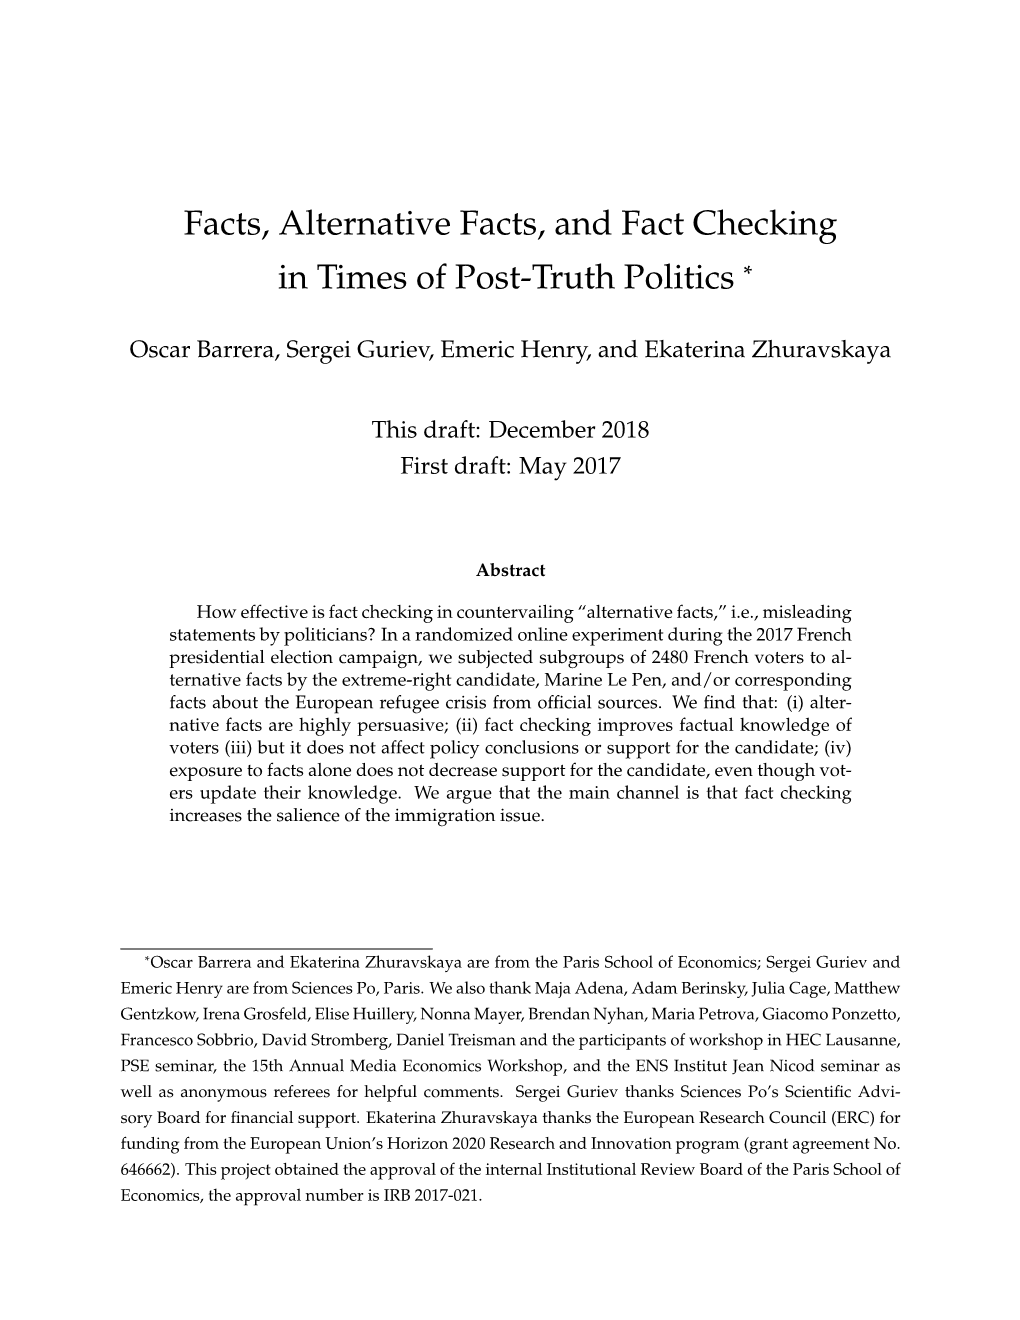 Facts, Alternative Facts, and Fact Checking in Times of Post-Truth Politics *